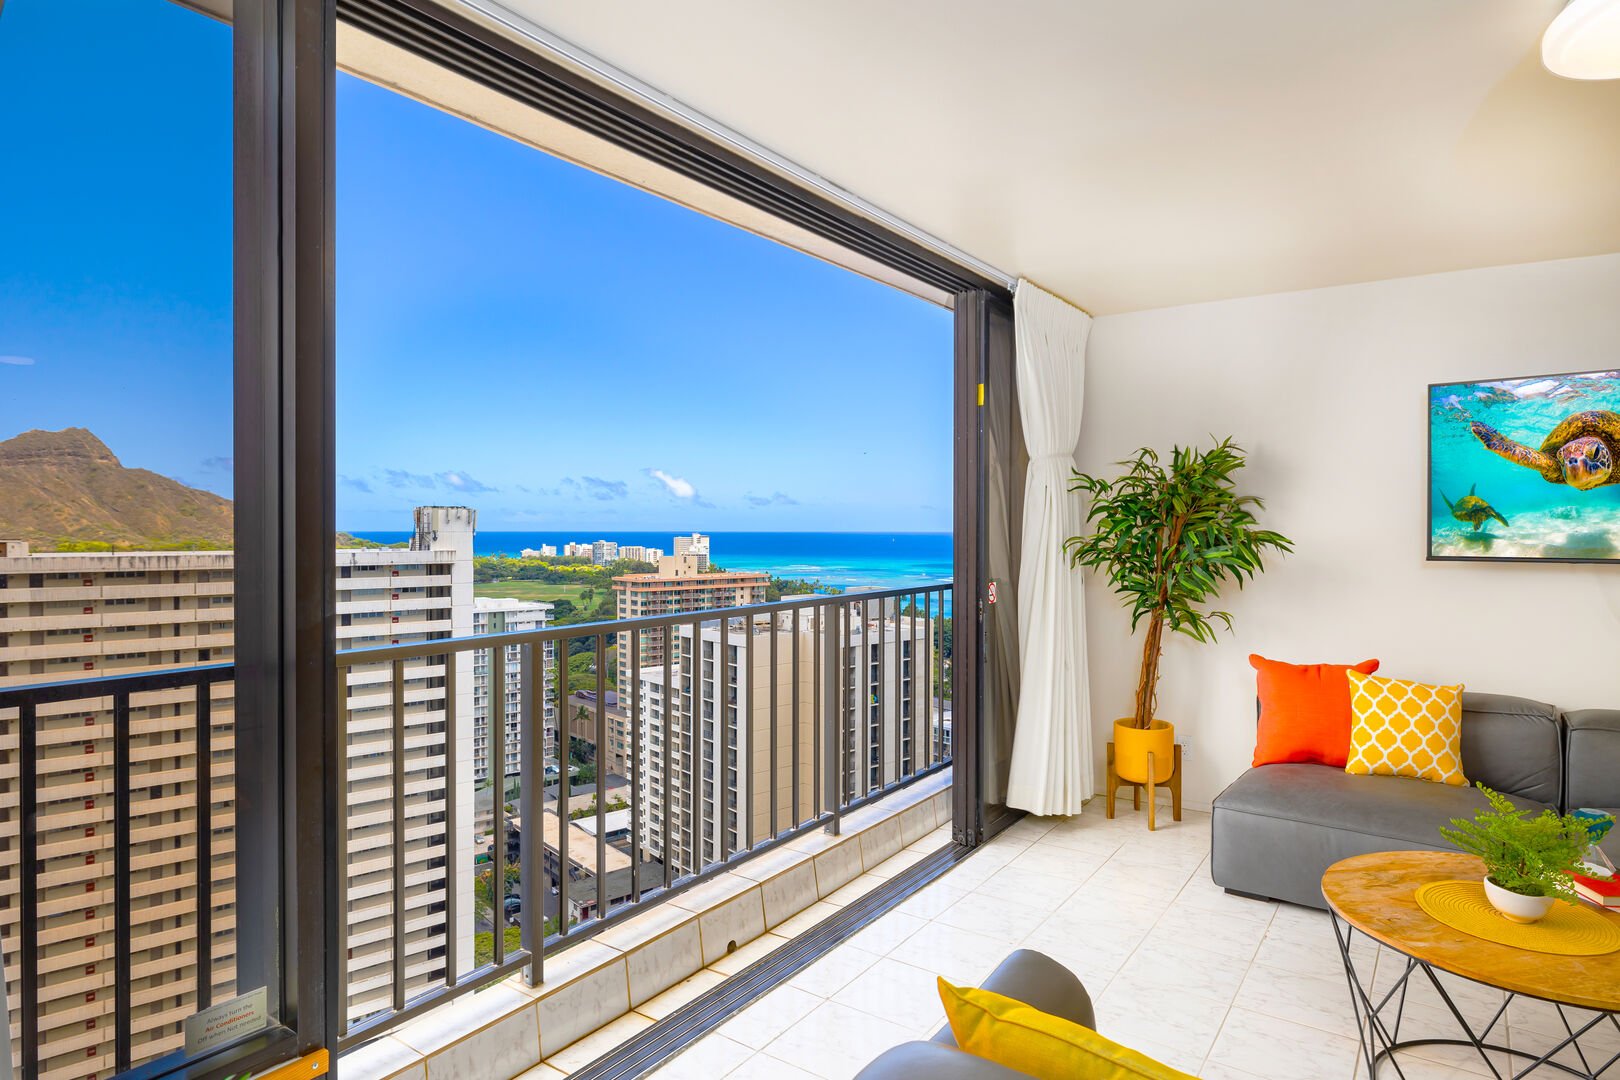 Stunning ocean view and Diamond Head View from the living room.